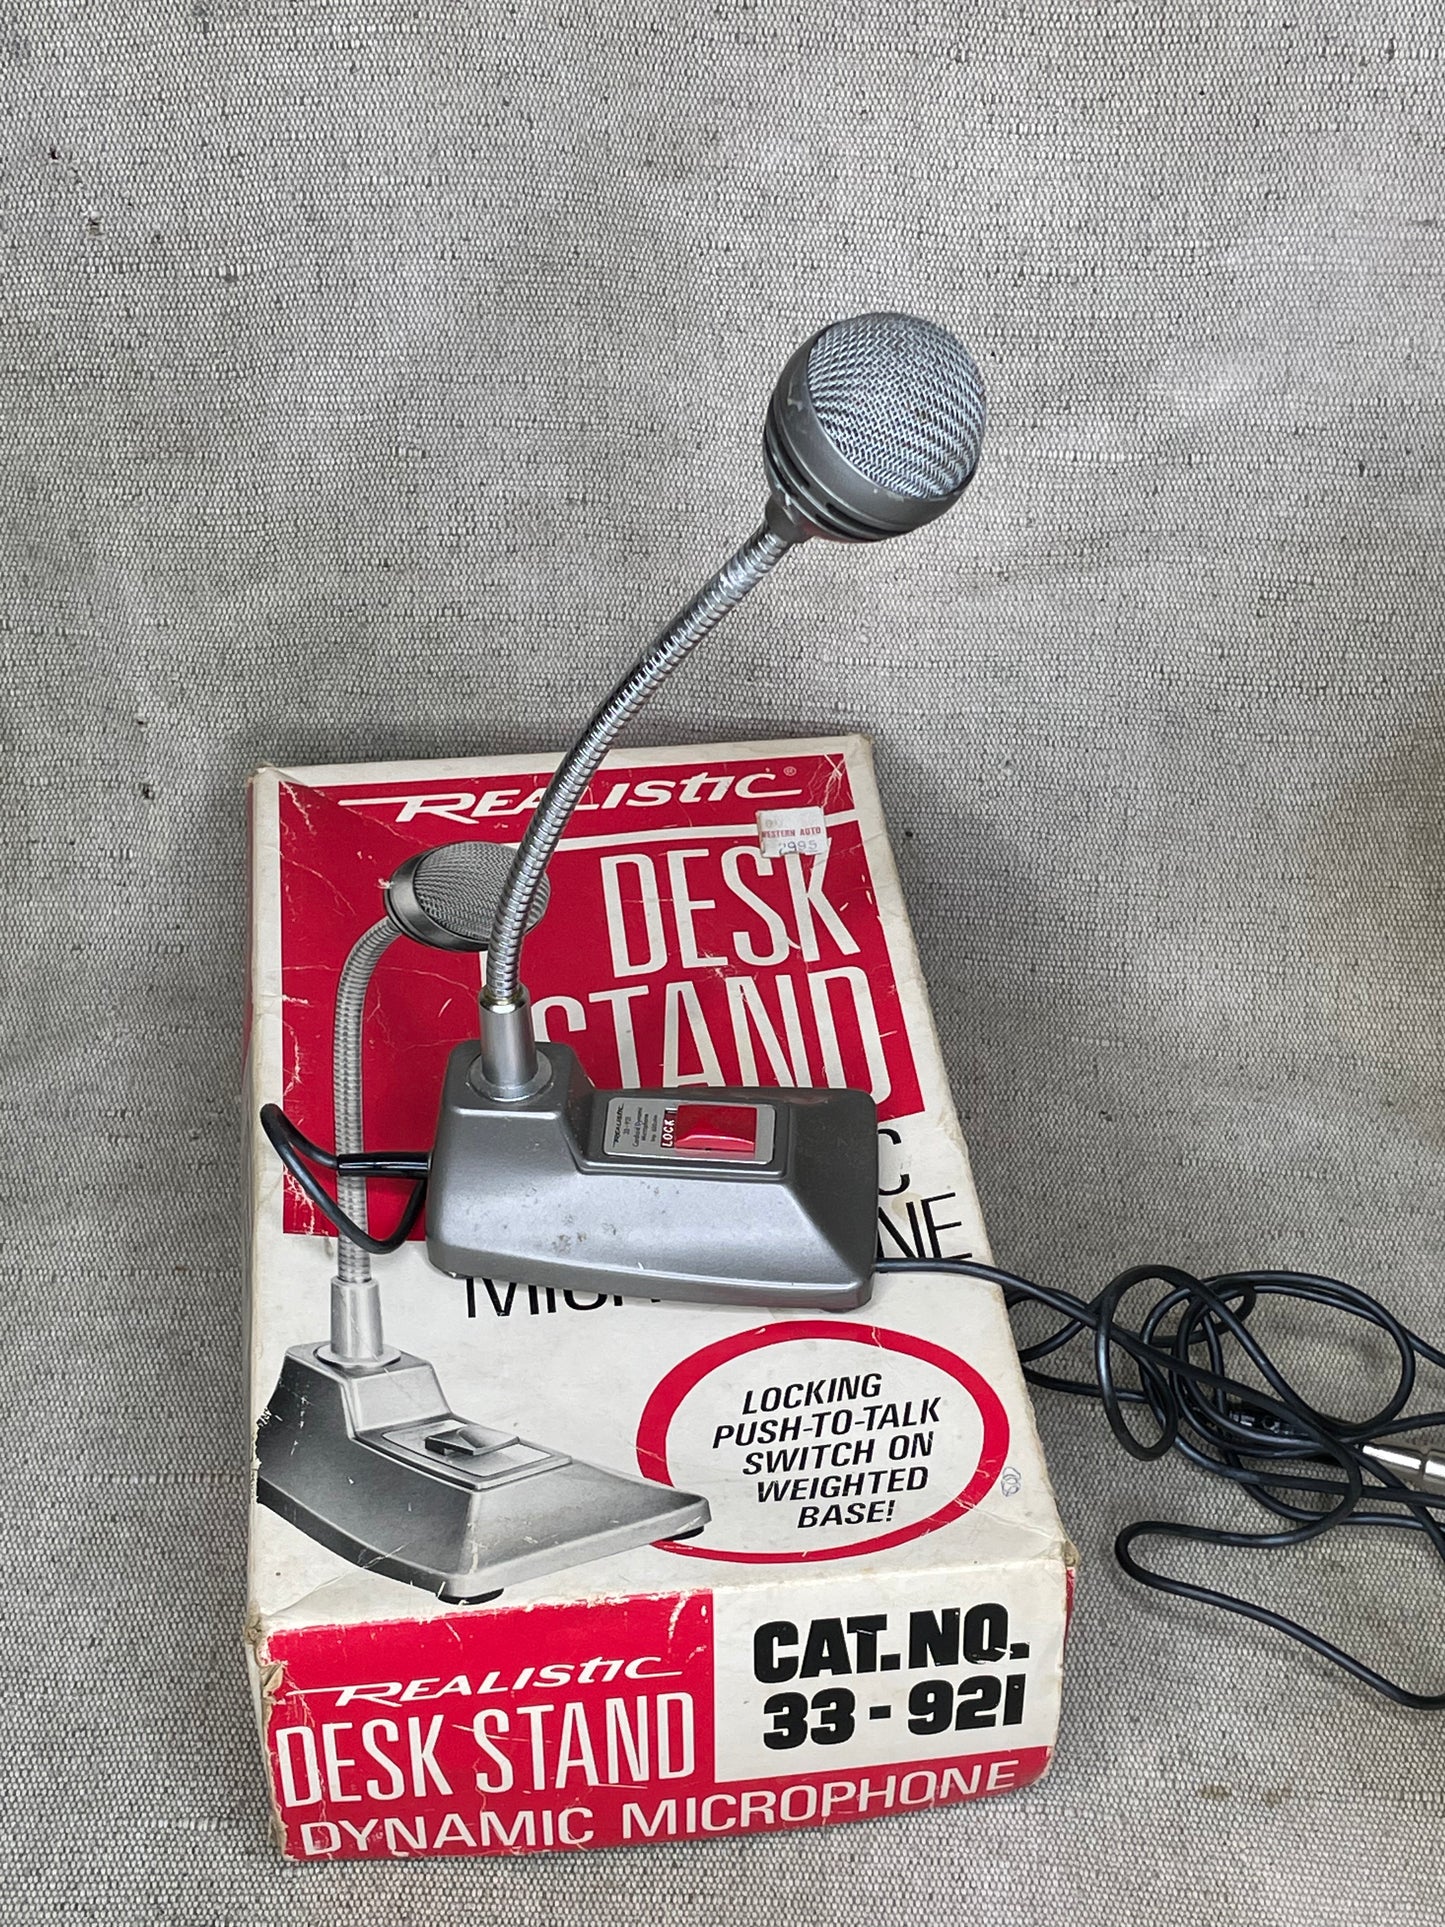 Vintage Microphone Realistic Desk Stand Untested